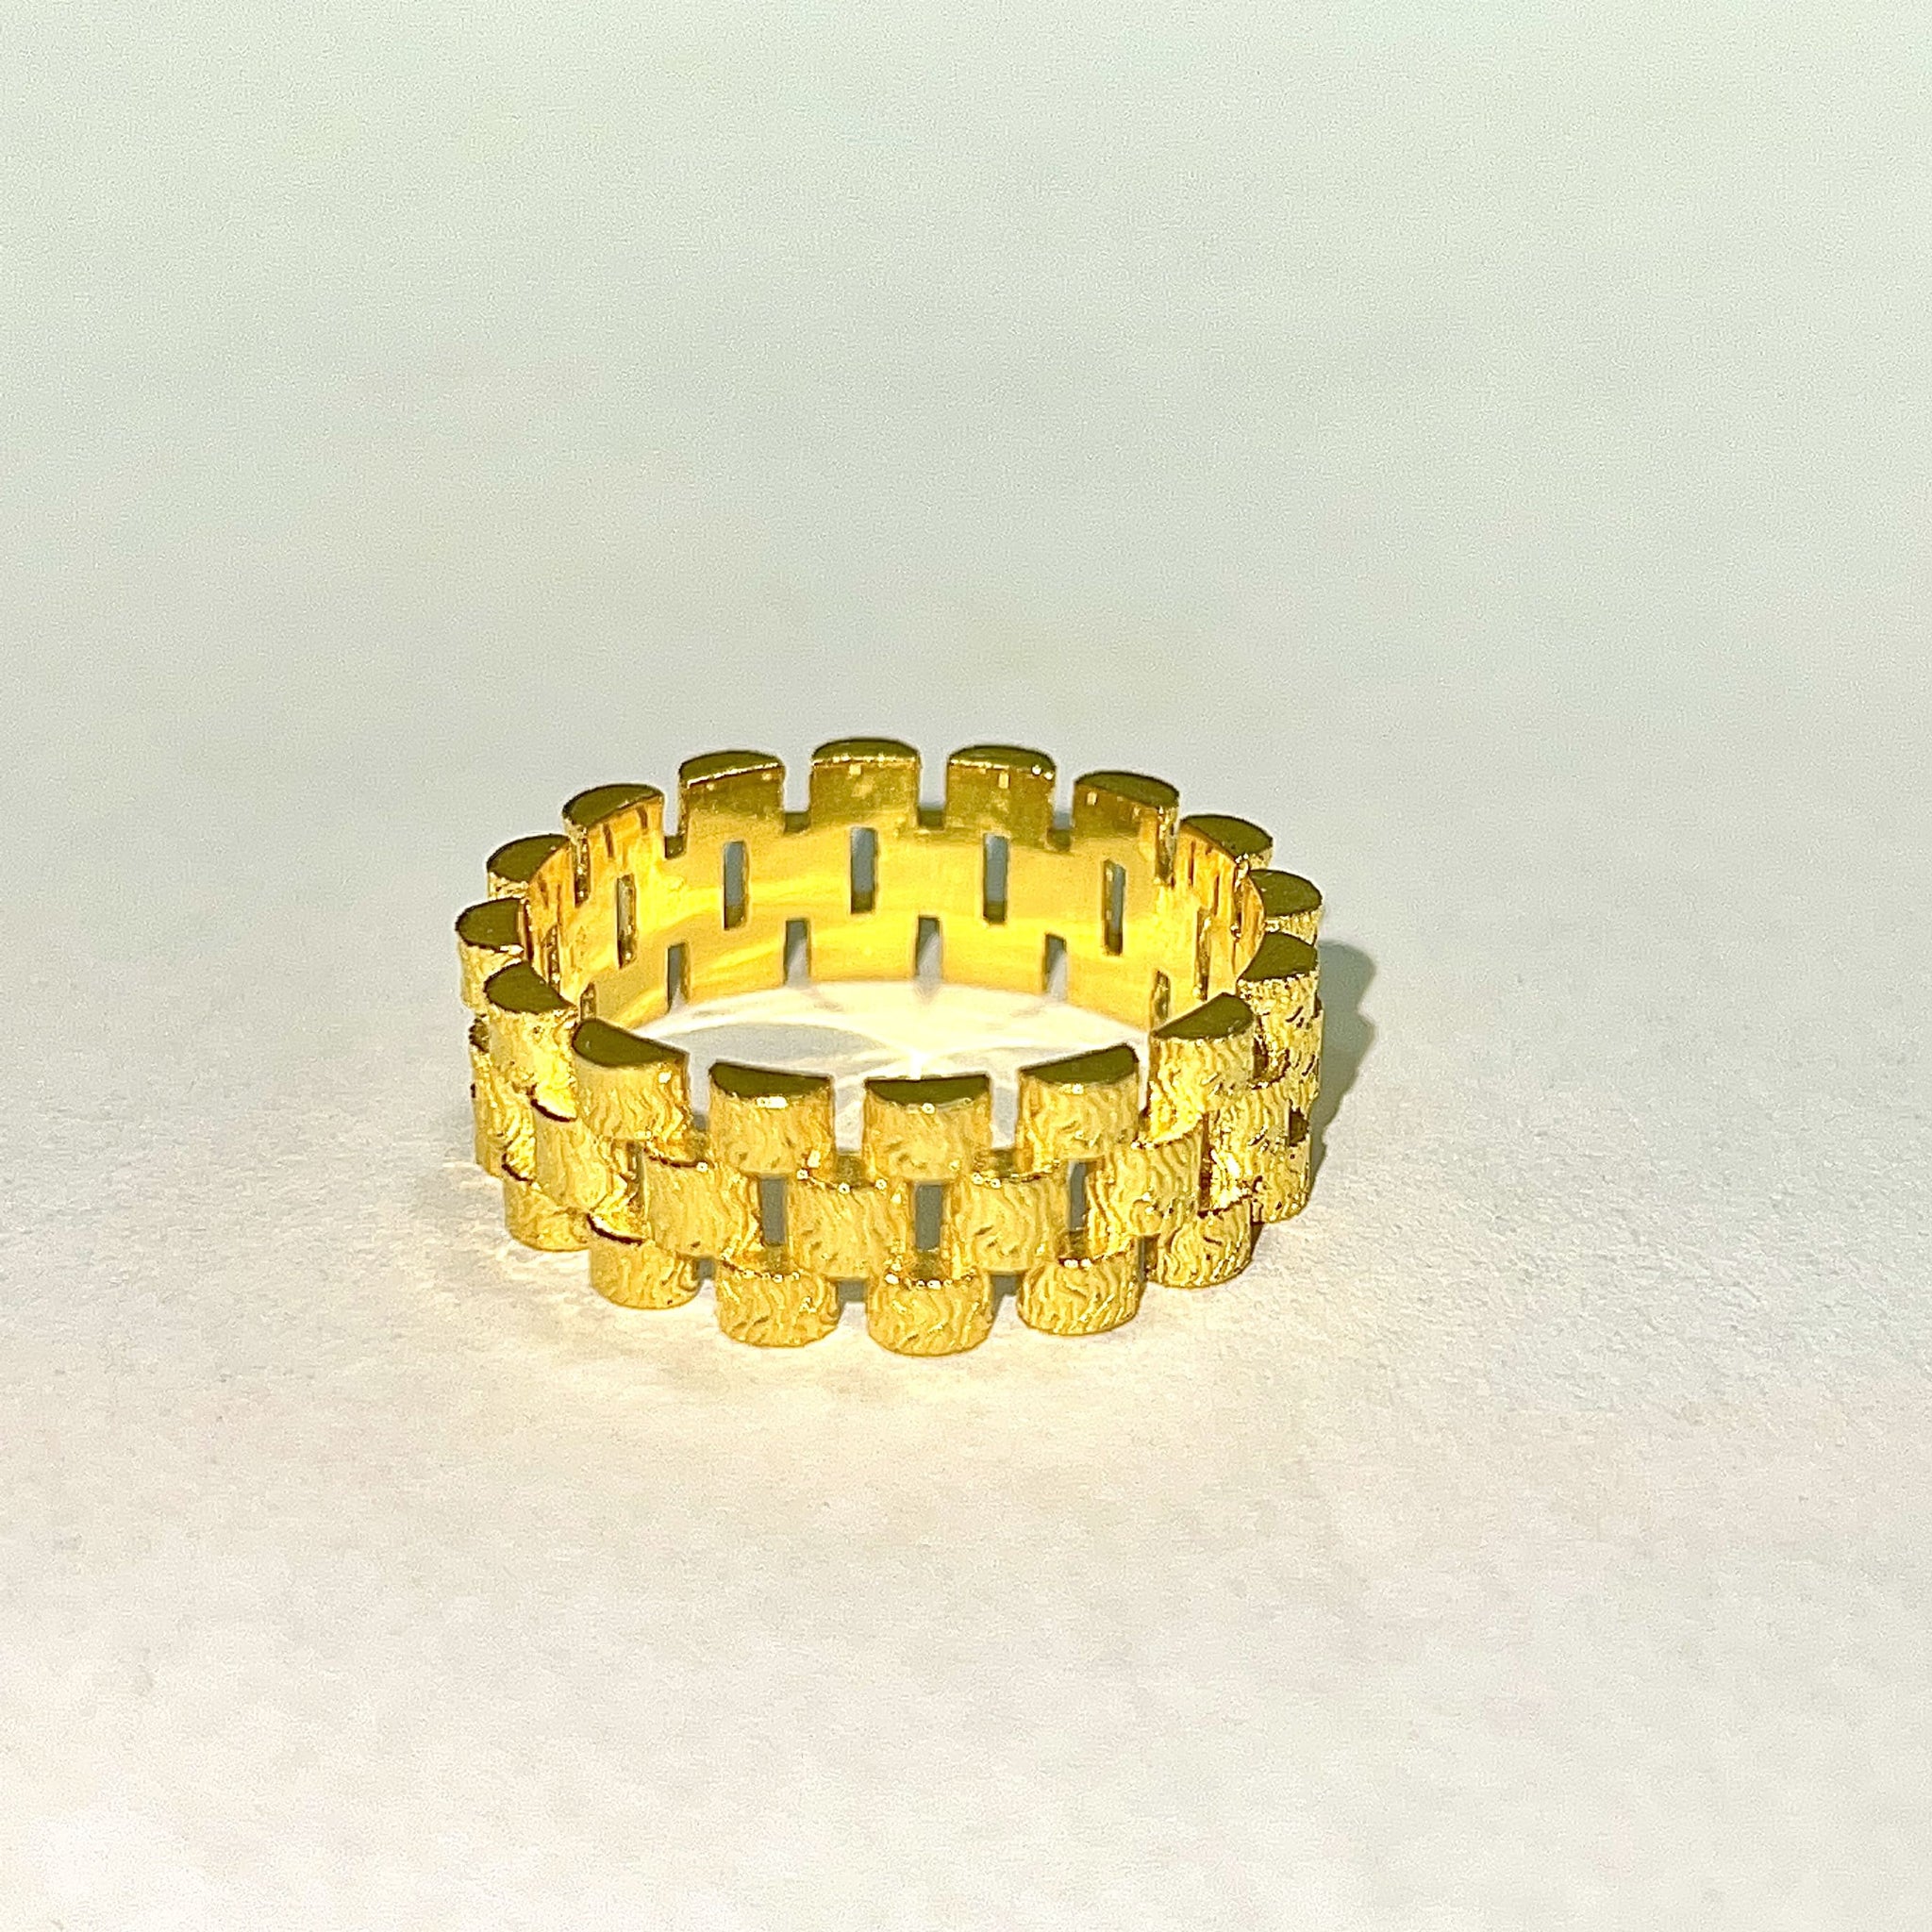 Icy Rolex-Link Ring - Silver 925 gold plated